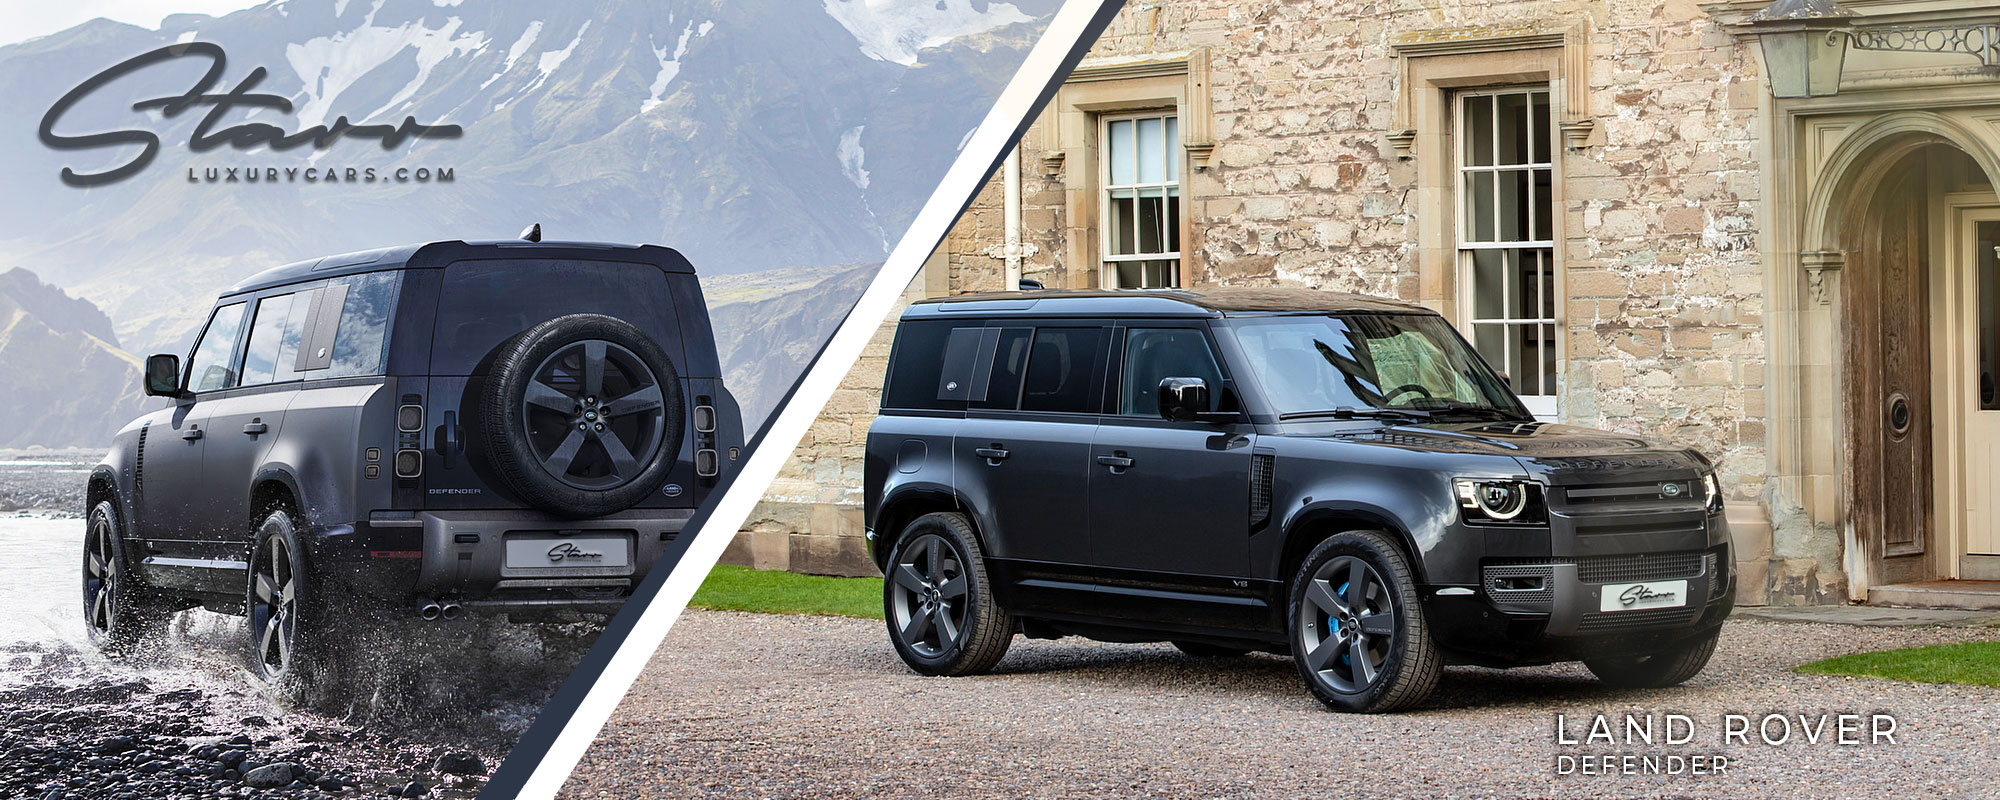 Starr Luxury Cars - Book a Supercar Land Rover Defender Self-hire and Chauffeur service, where exclusivity meets the opulence with the best coveted and exotica cars, - UK, Berkeley square, Mayfair